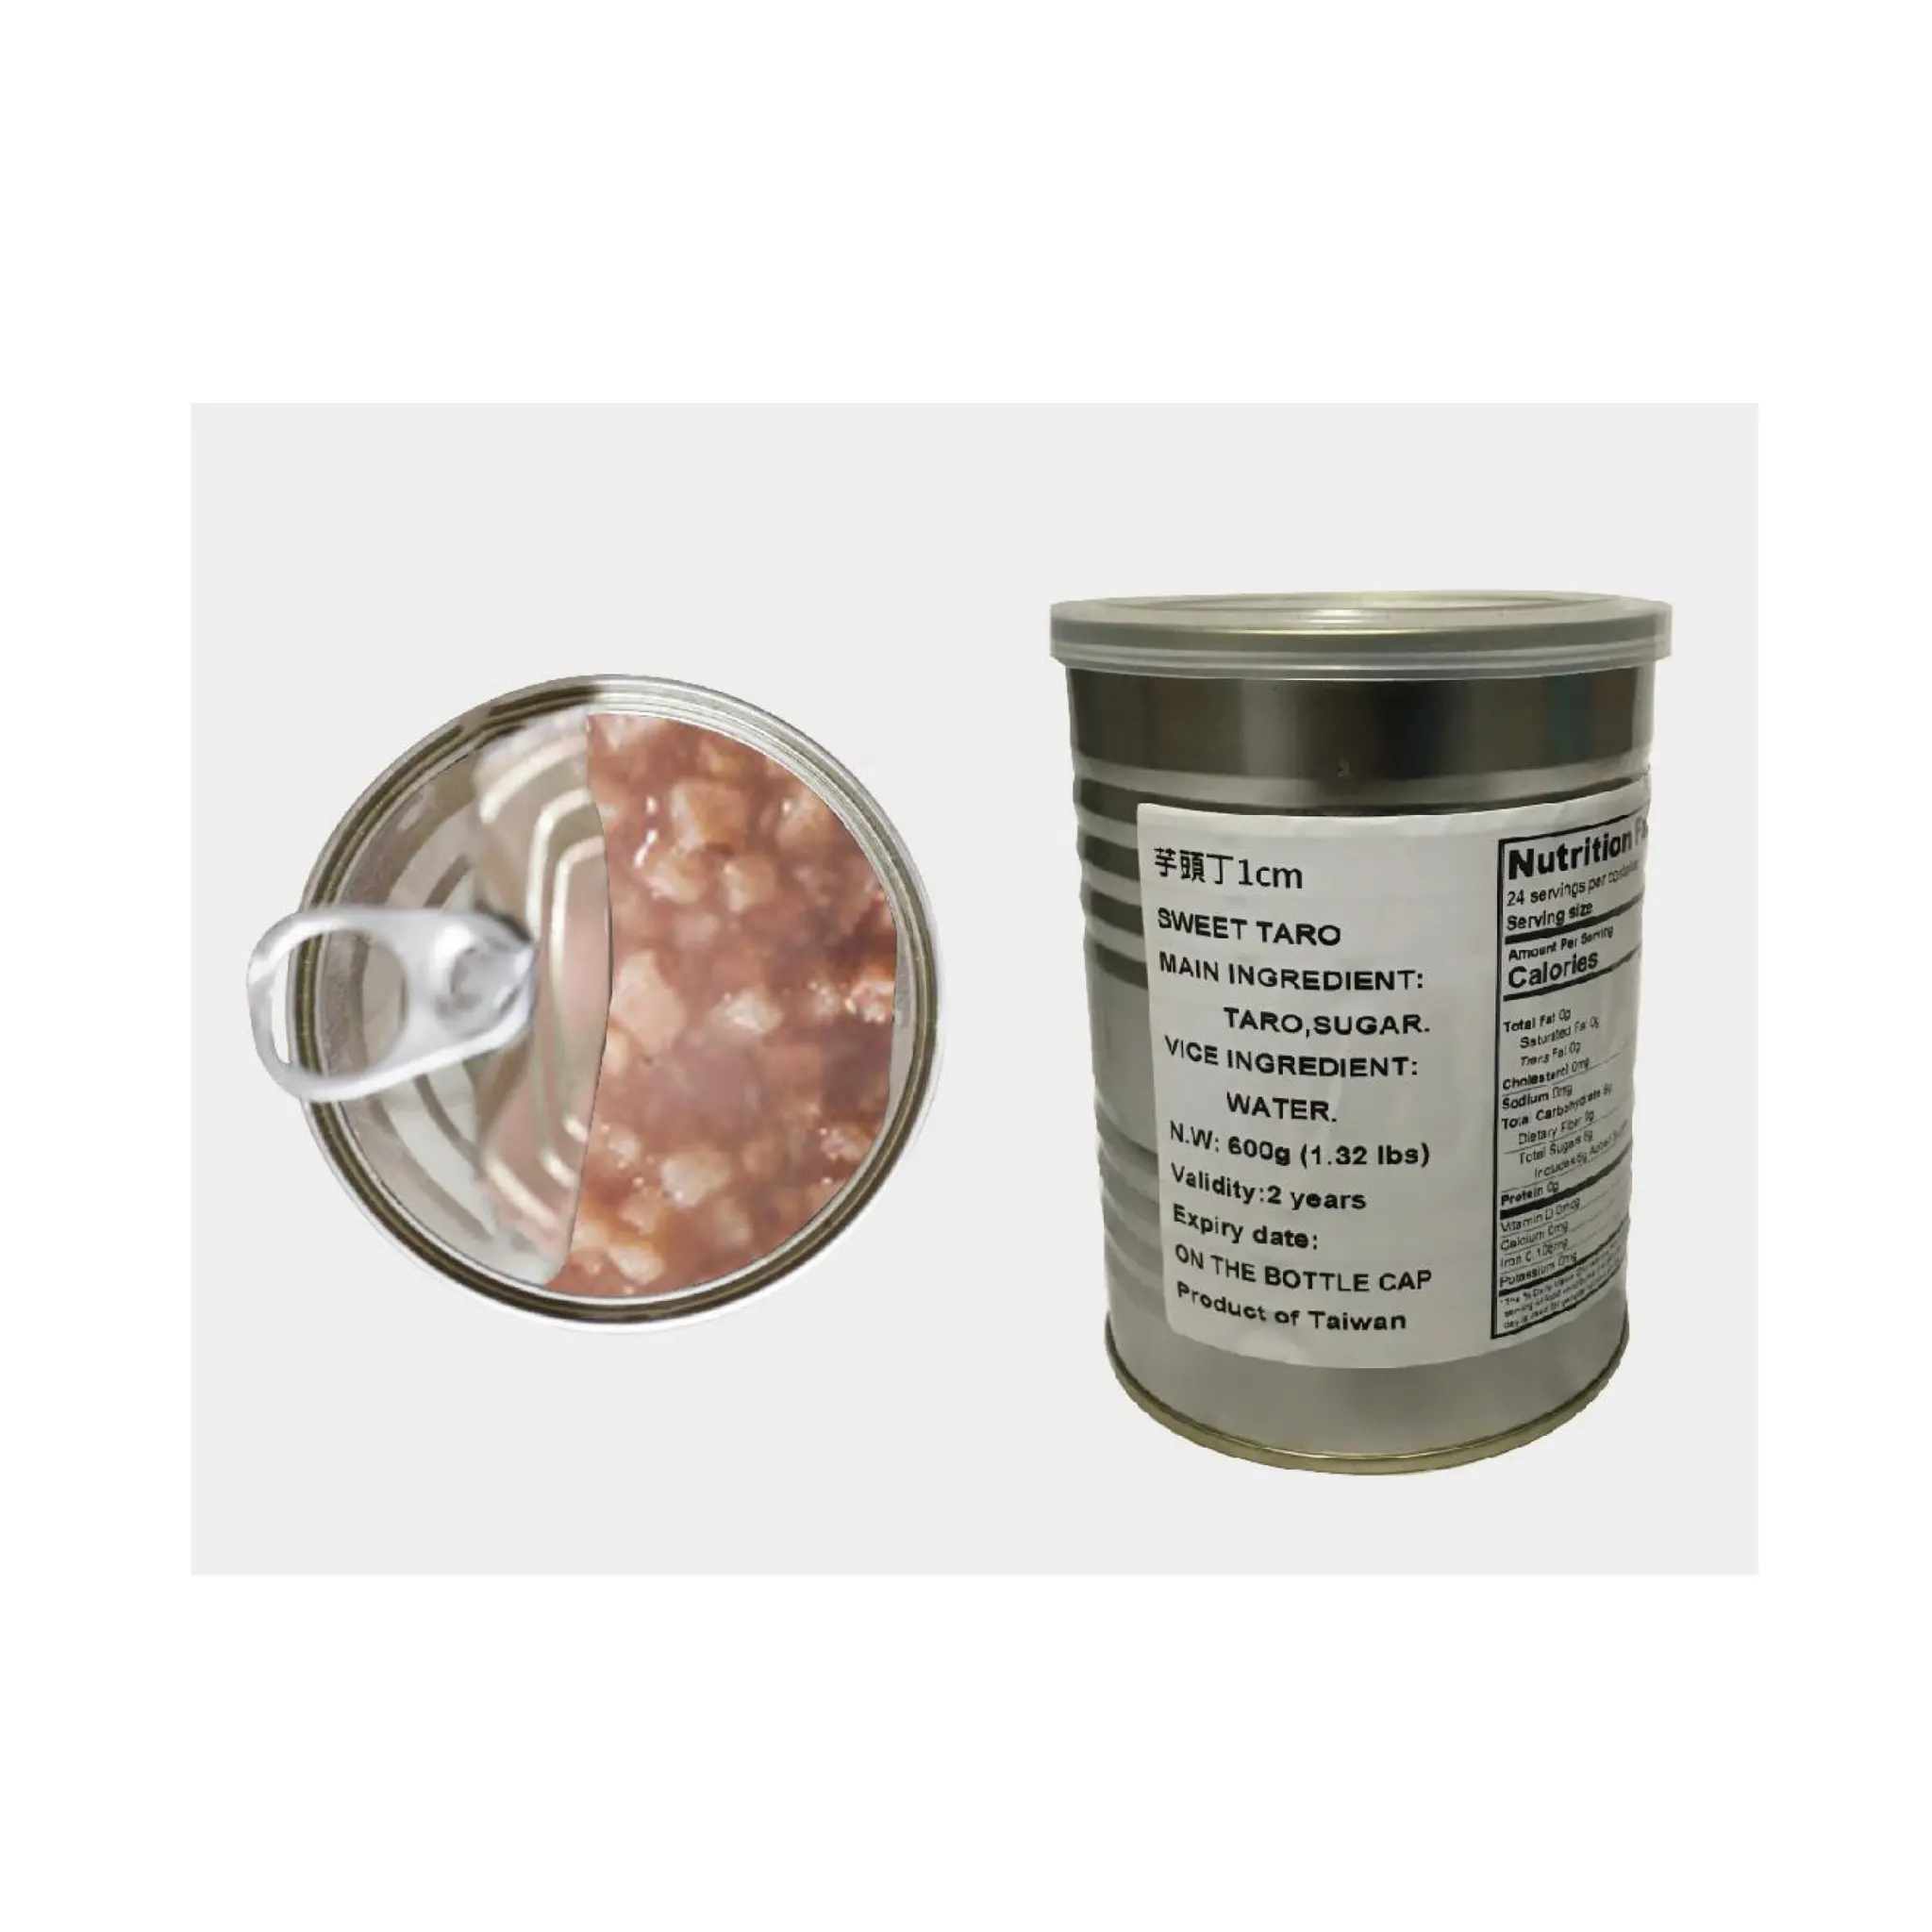 2cm Concentrated Room temperature canned instant taro 3.3KG